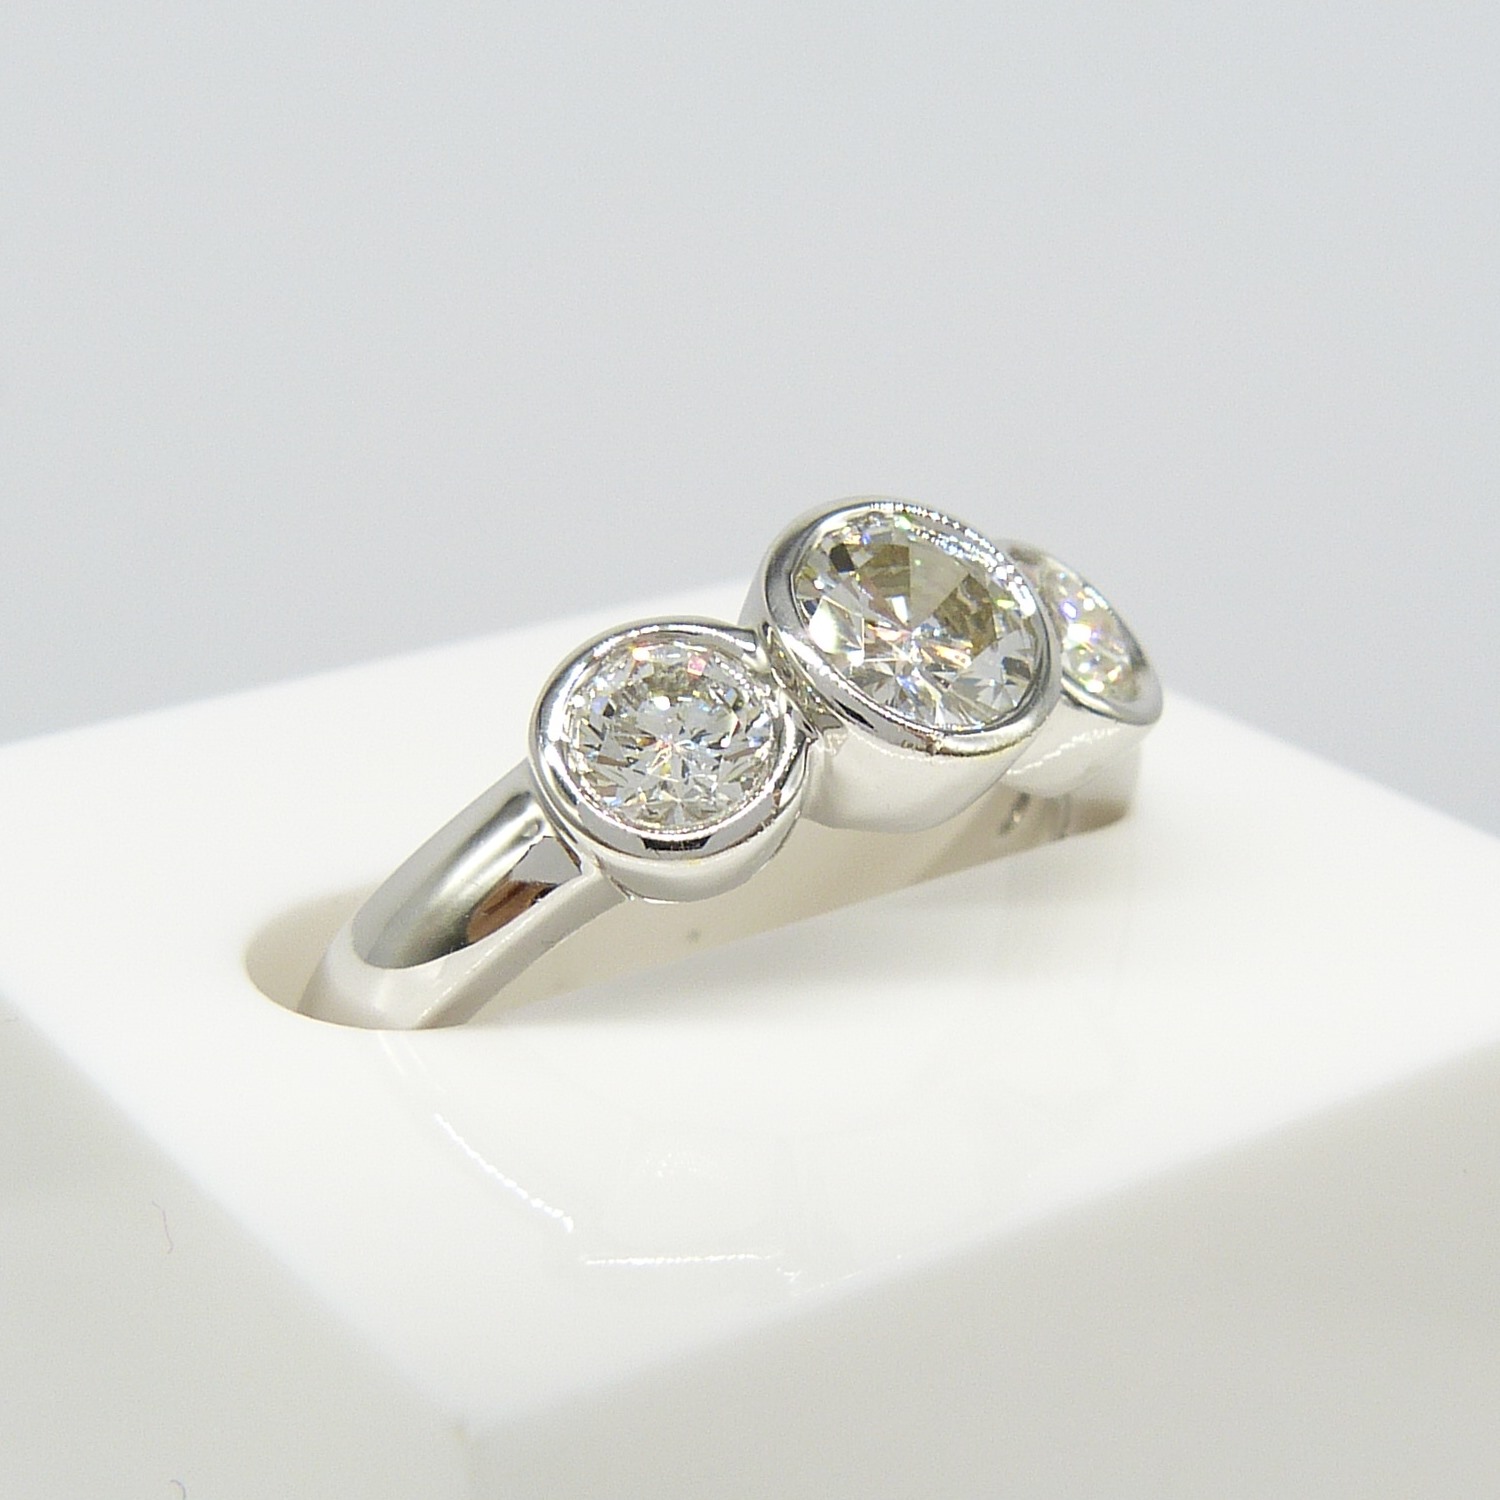 1.00 Carat Graduated Diamond 3-Stone Ring In 18ct White Gold, With Certificate - Image 3 of 8